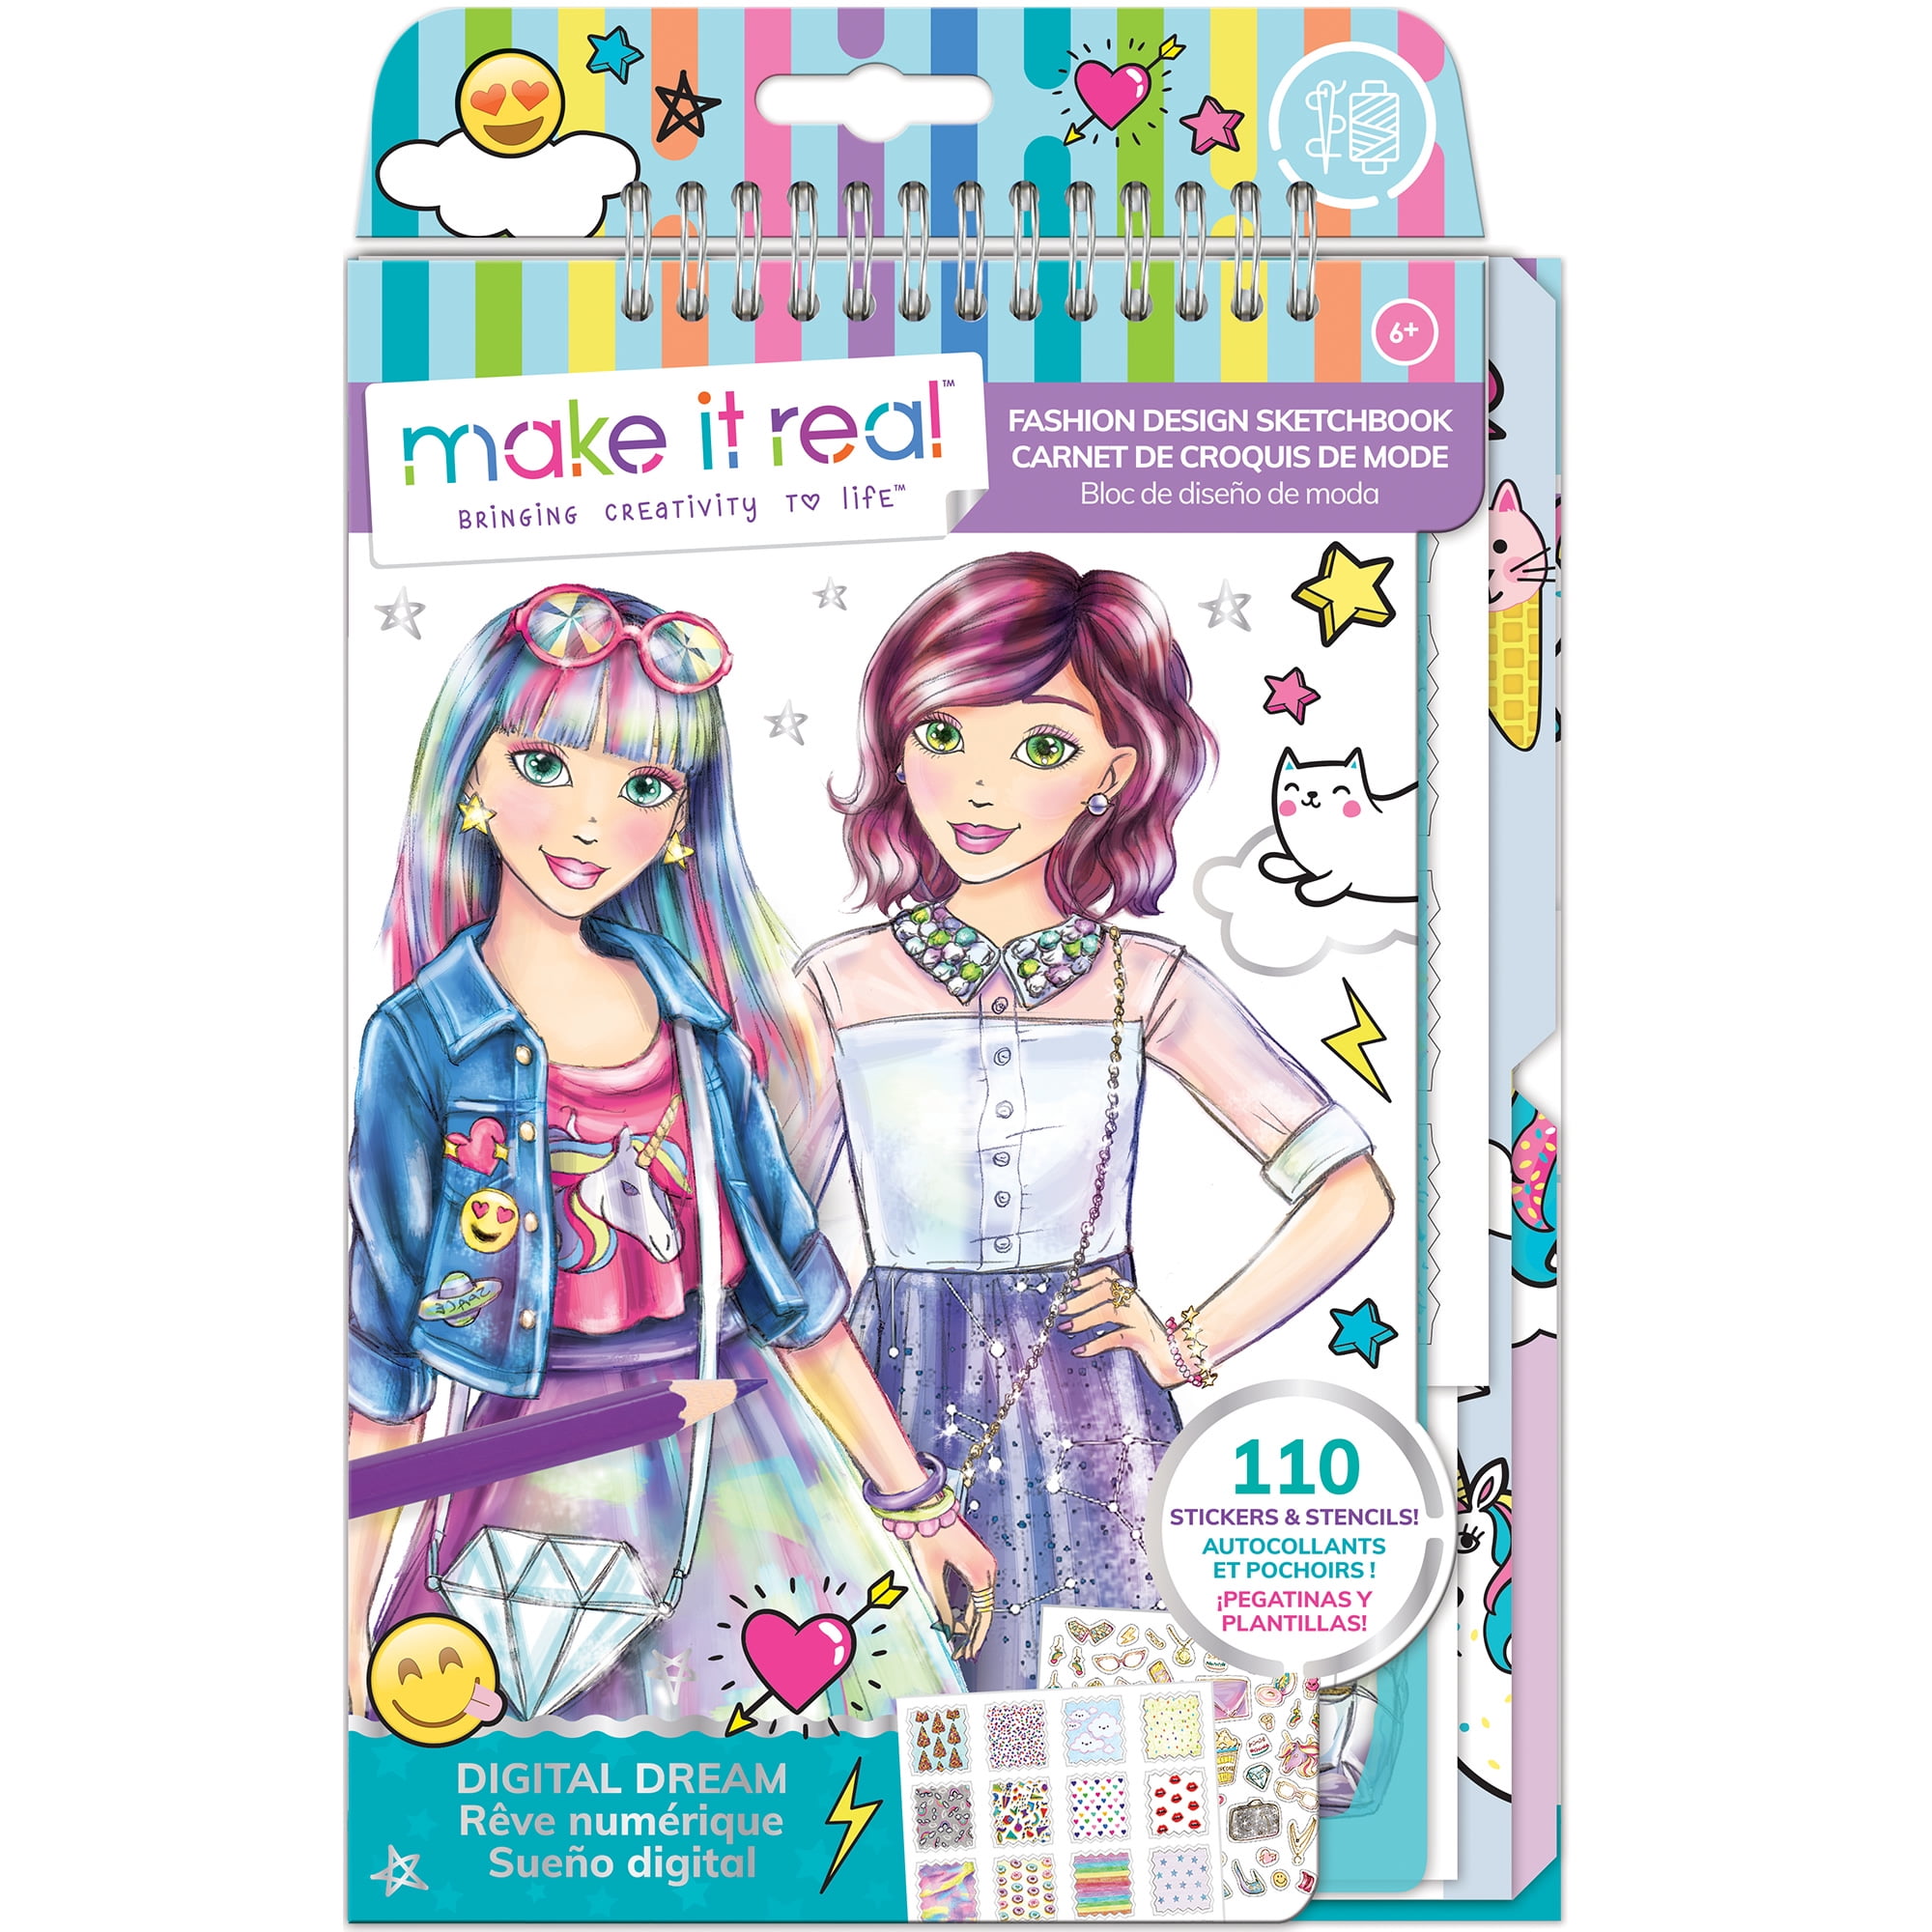 Make It Real – Fashion Design Sketchbook: City Style - Inspirational  Fashion Design Coloring Book for Girls - Includes Sketchbook, Stencils,  Stickers